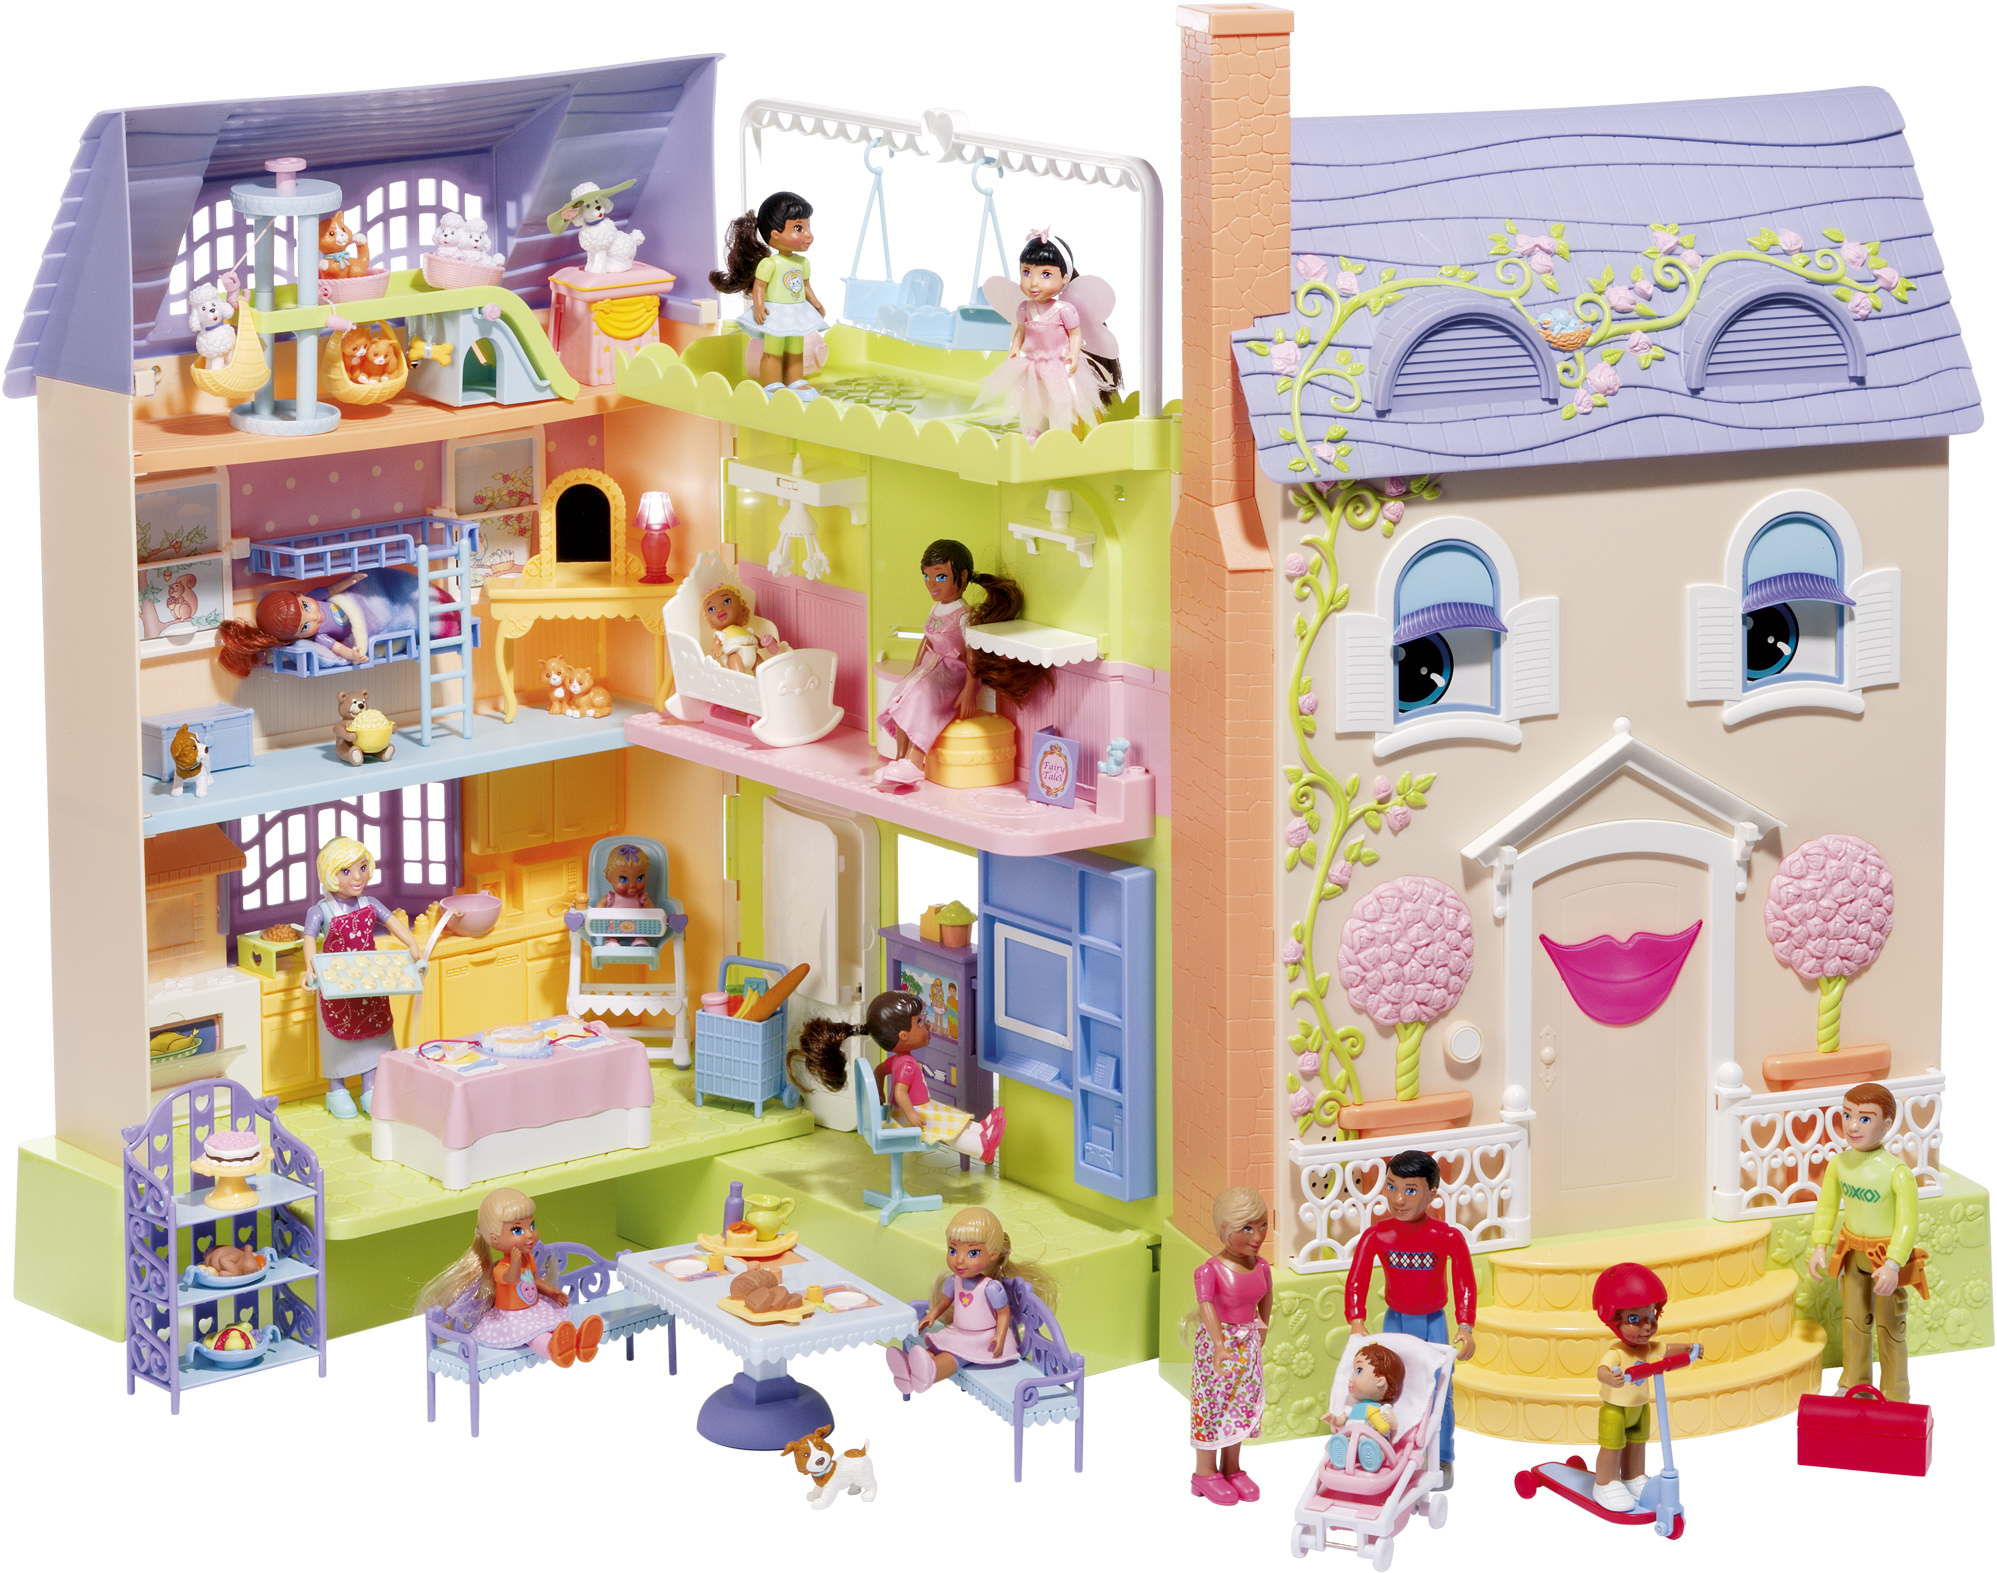 A Toy House With Dolls And A Doll House